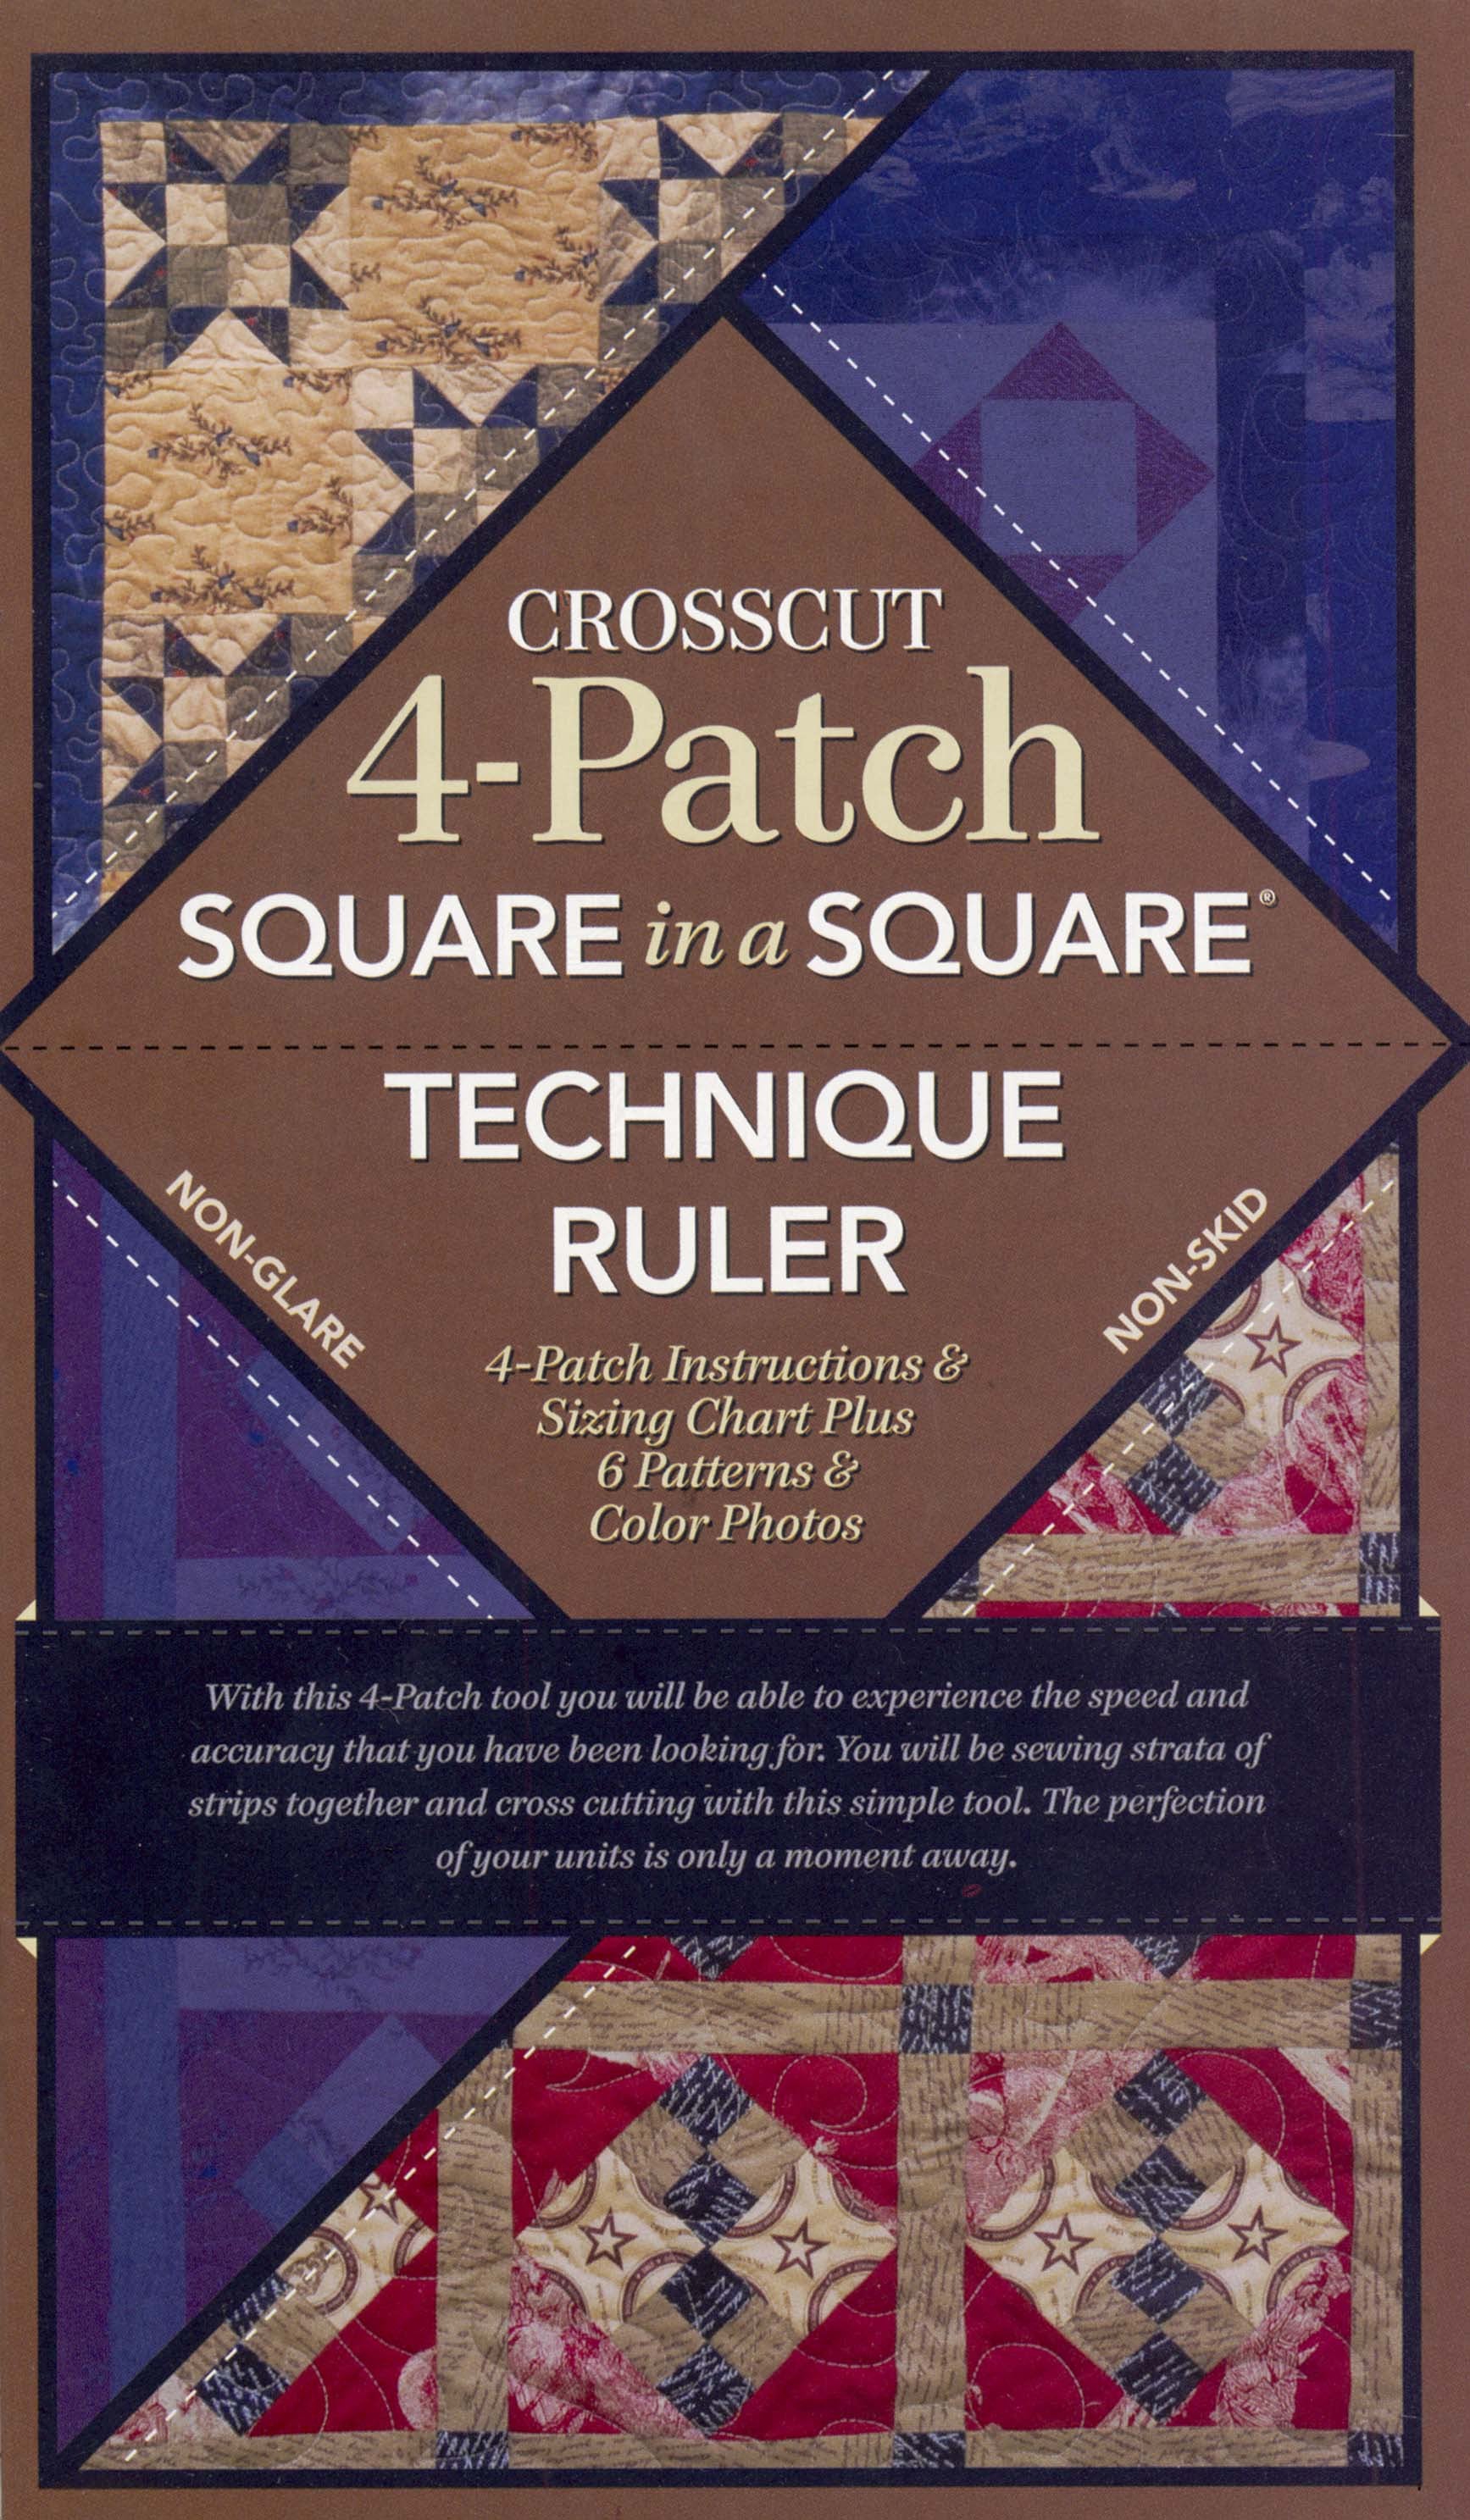 Crosscut 4 Patch Quilt Ruler With Book by Jodi Barrows for Square in a Square